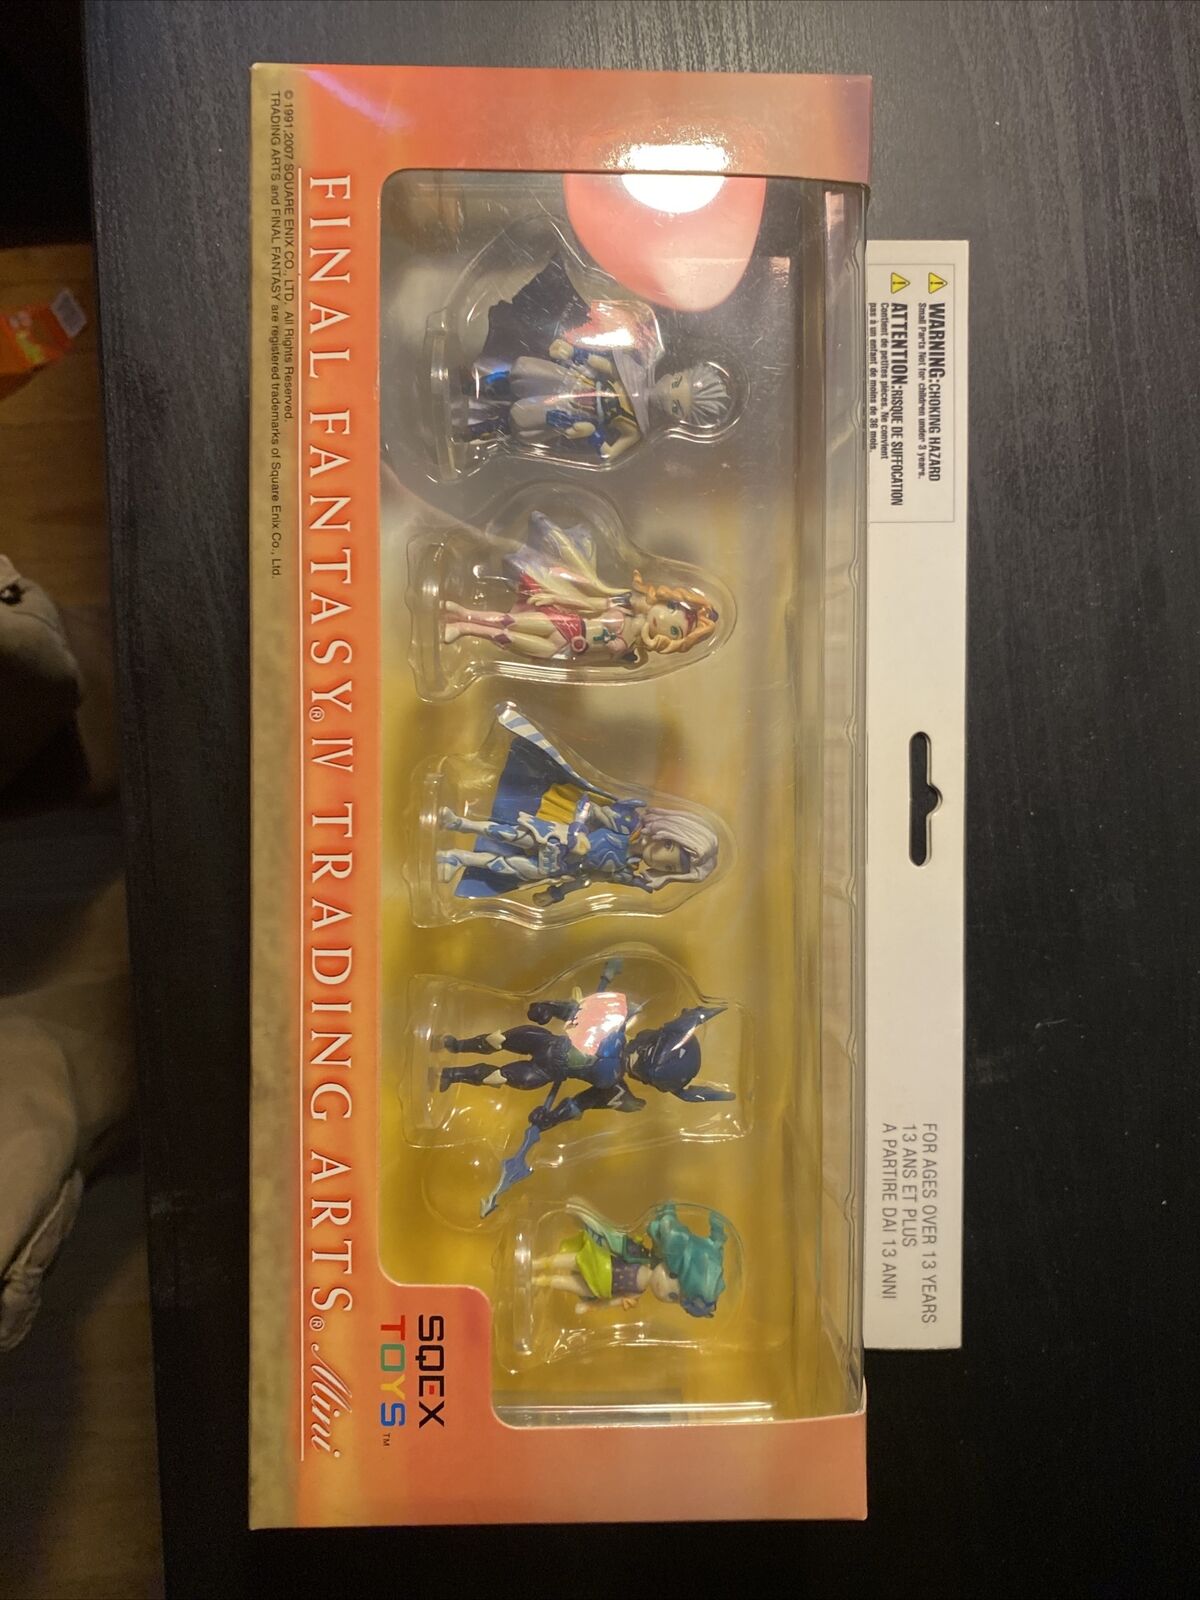 final fantasy iv trading arts Figurines In The Original Package